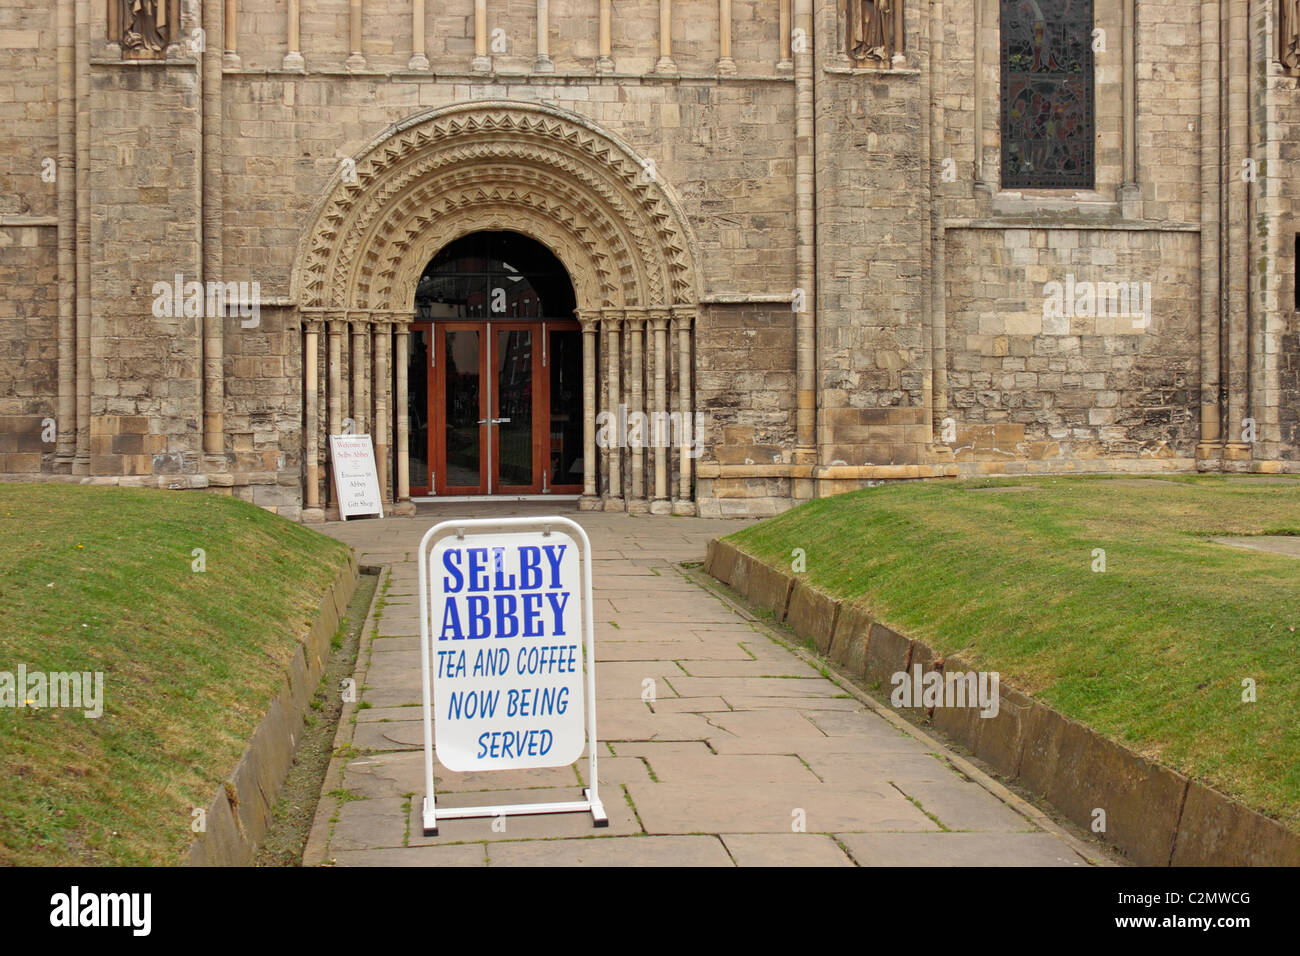 Selby Abbey west entrance 'Tea and Coffee now being served' Stock Photo